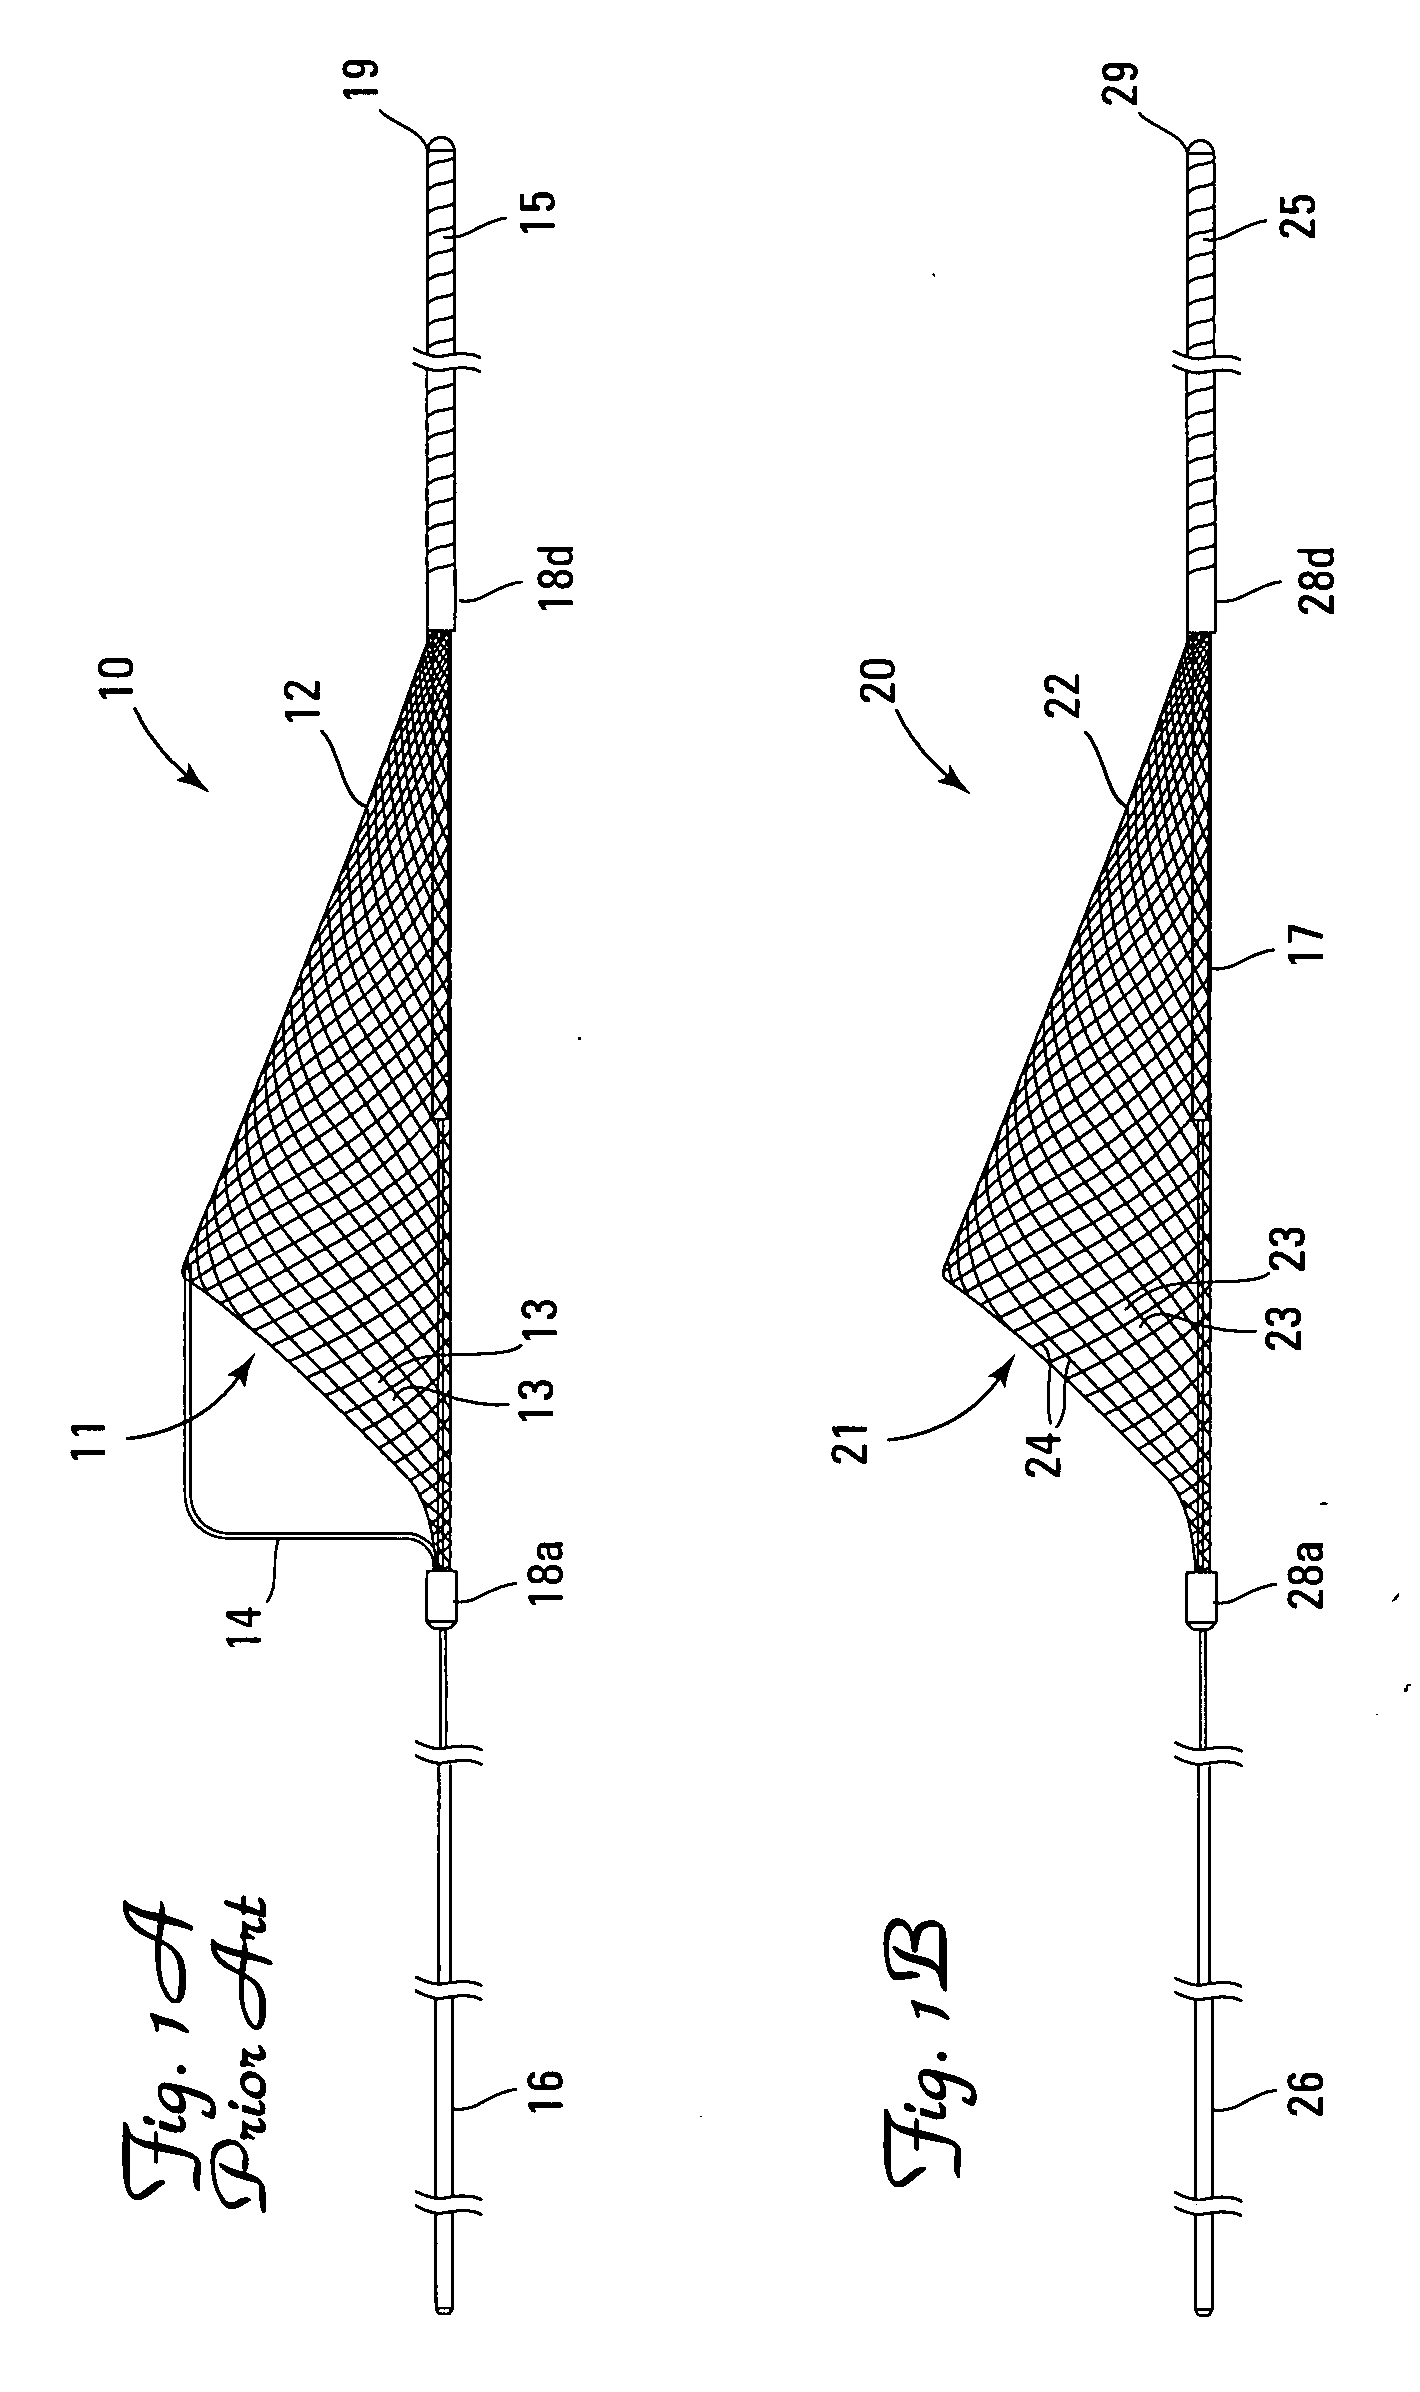 Embolic protection devices having radiopaque markers